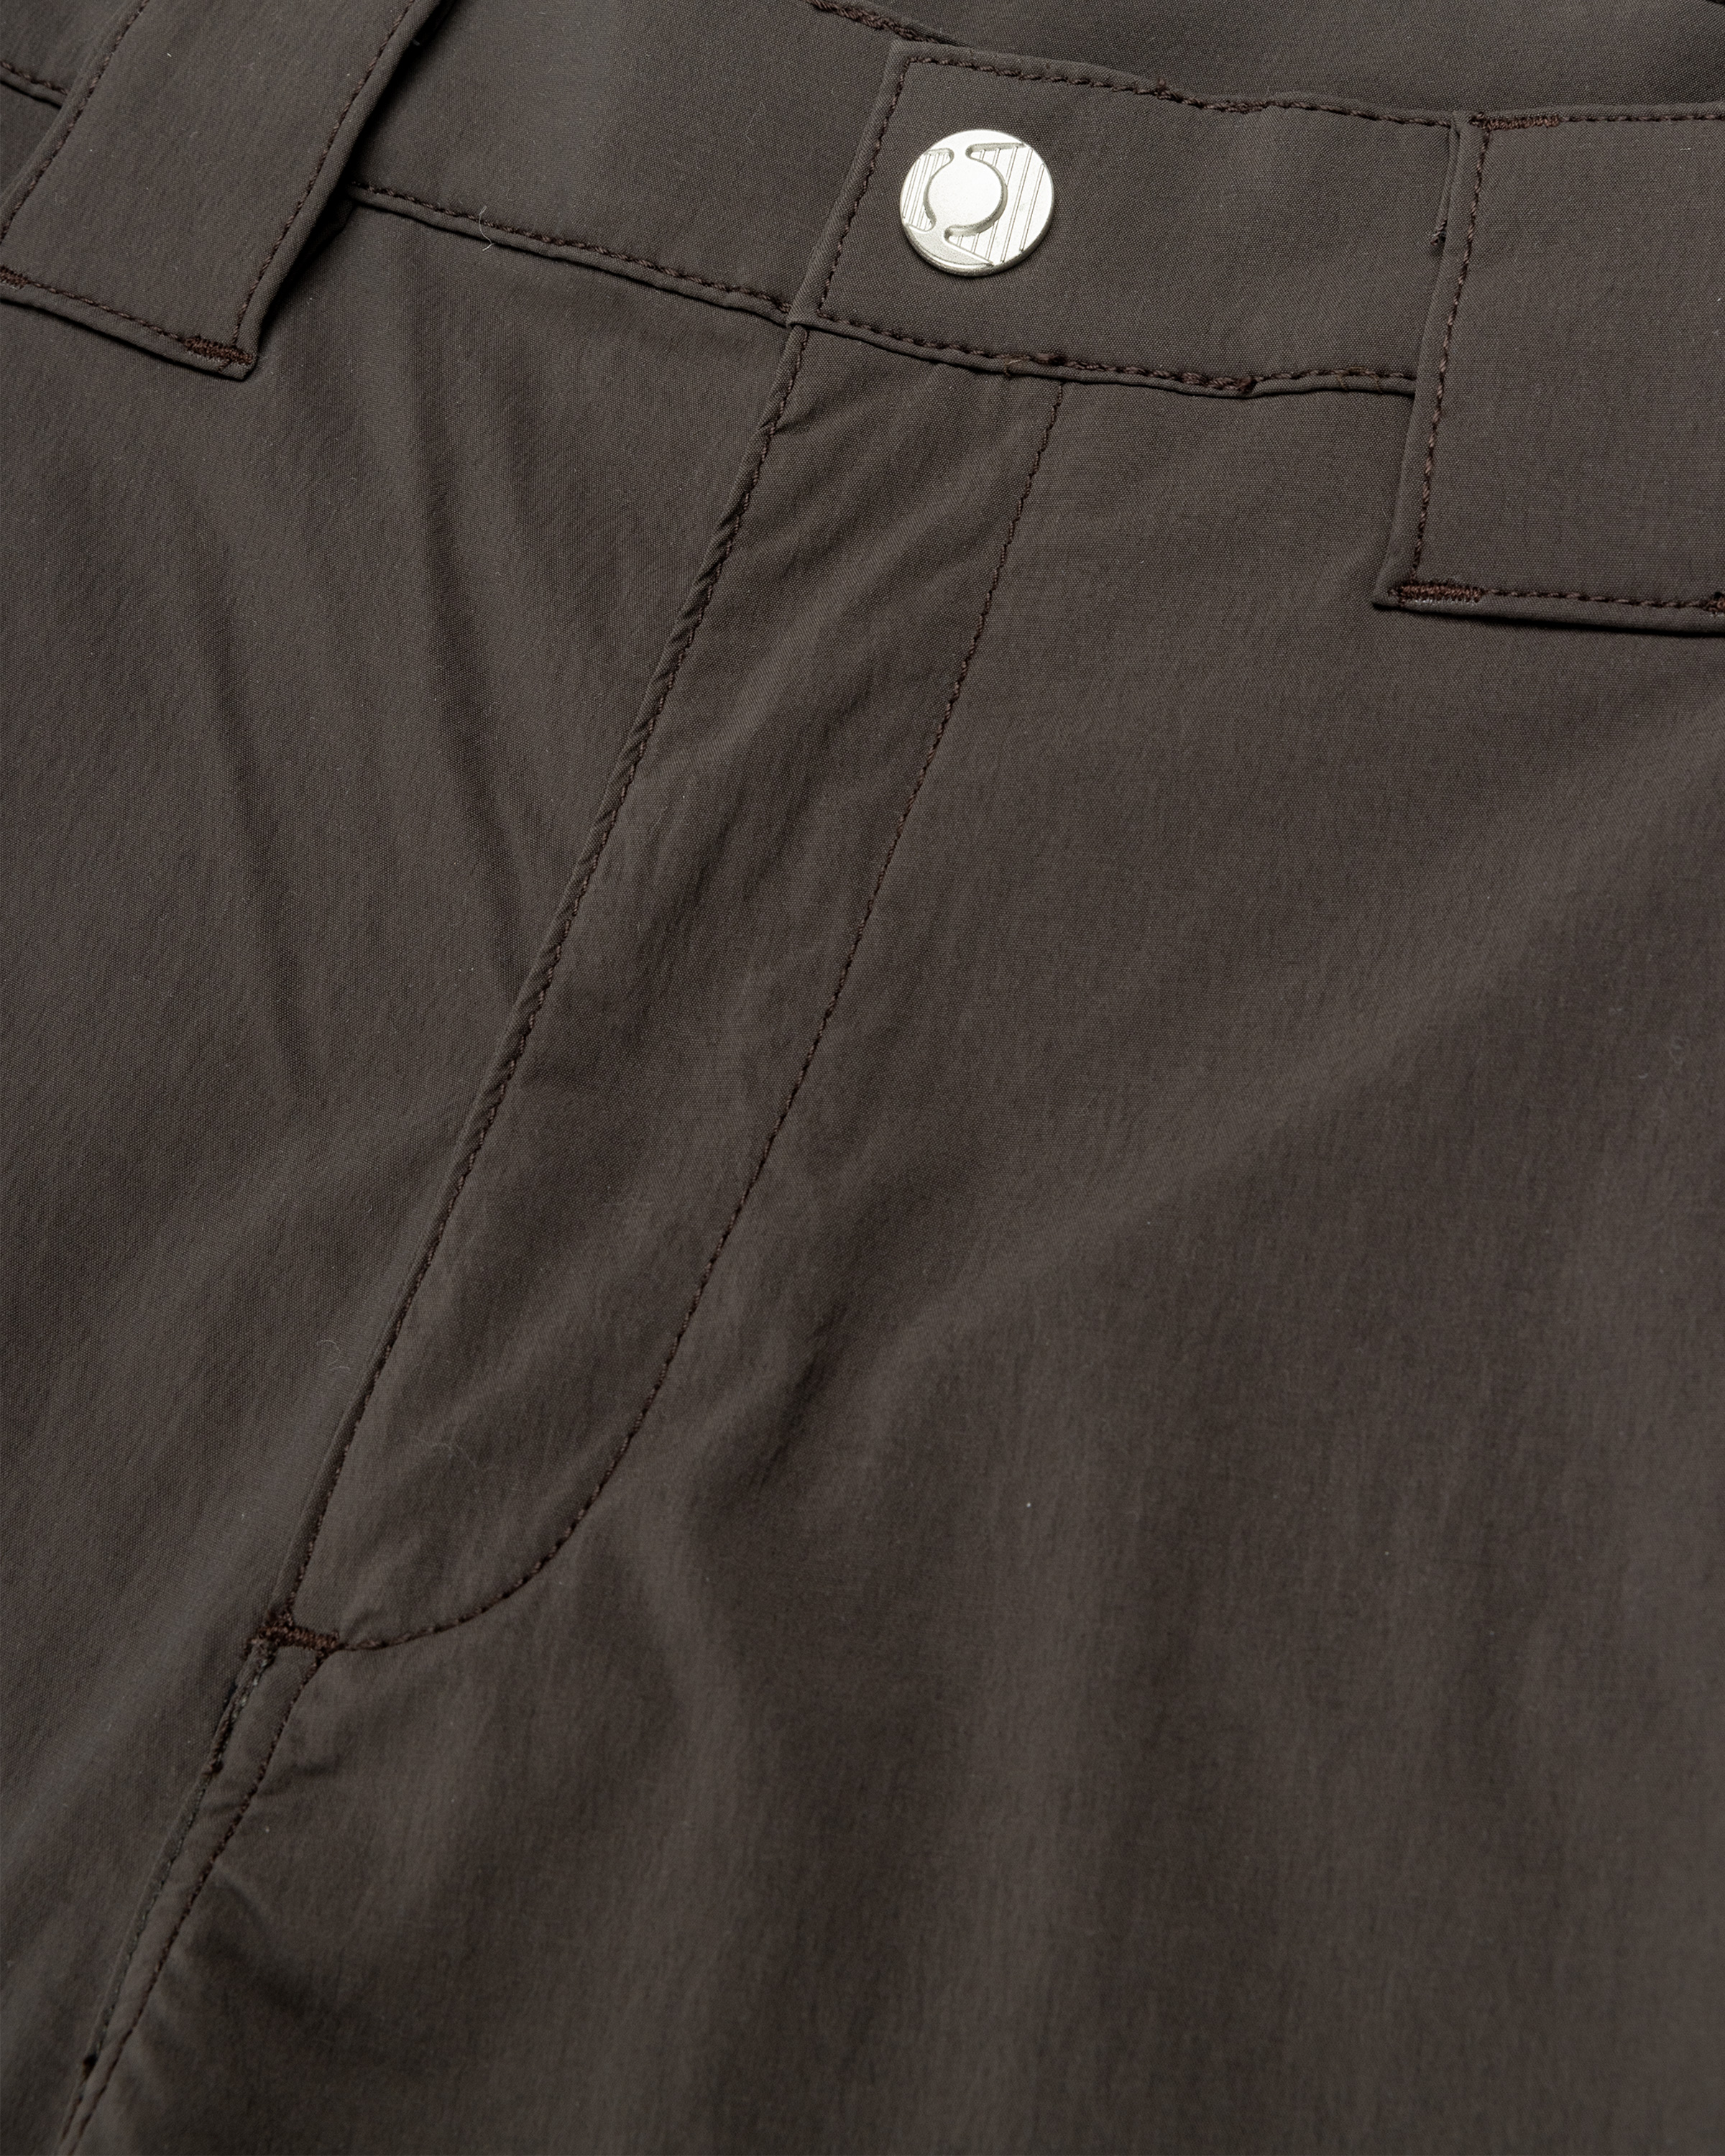 AFFXWRKS – Curved Pant Shale Brown - Trousers - Brown - Image 6